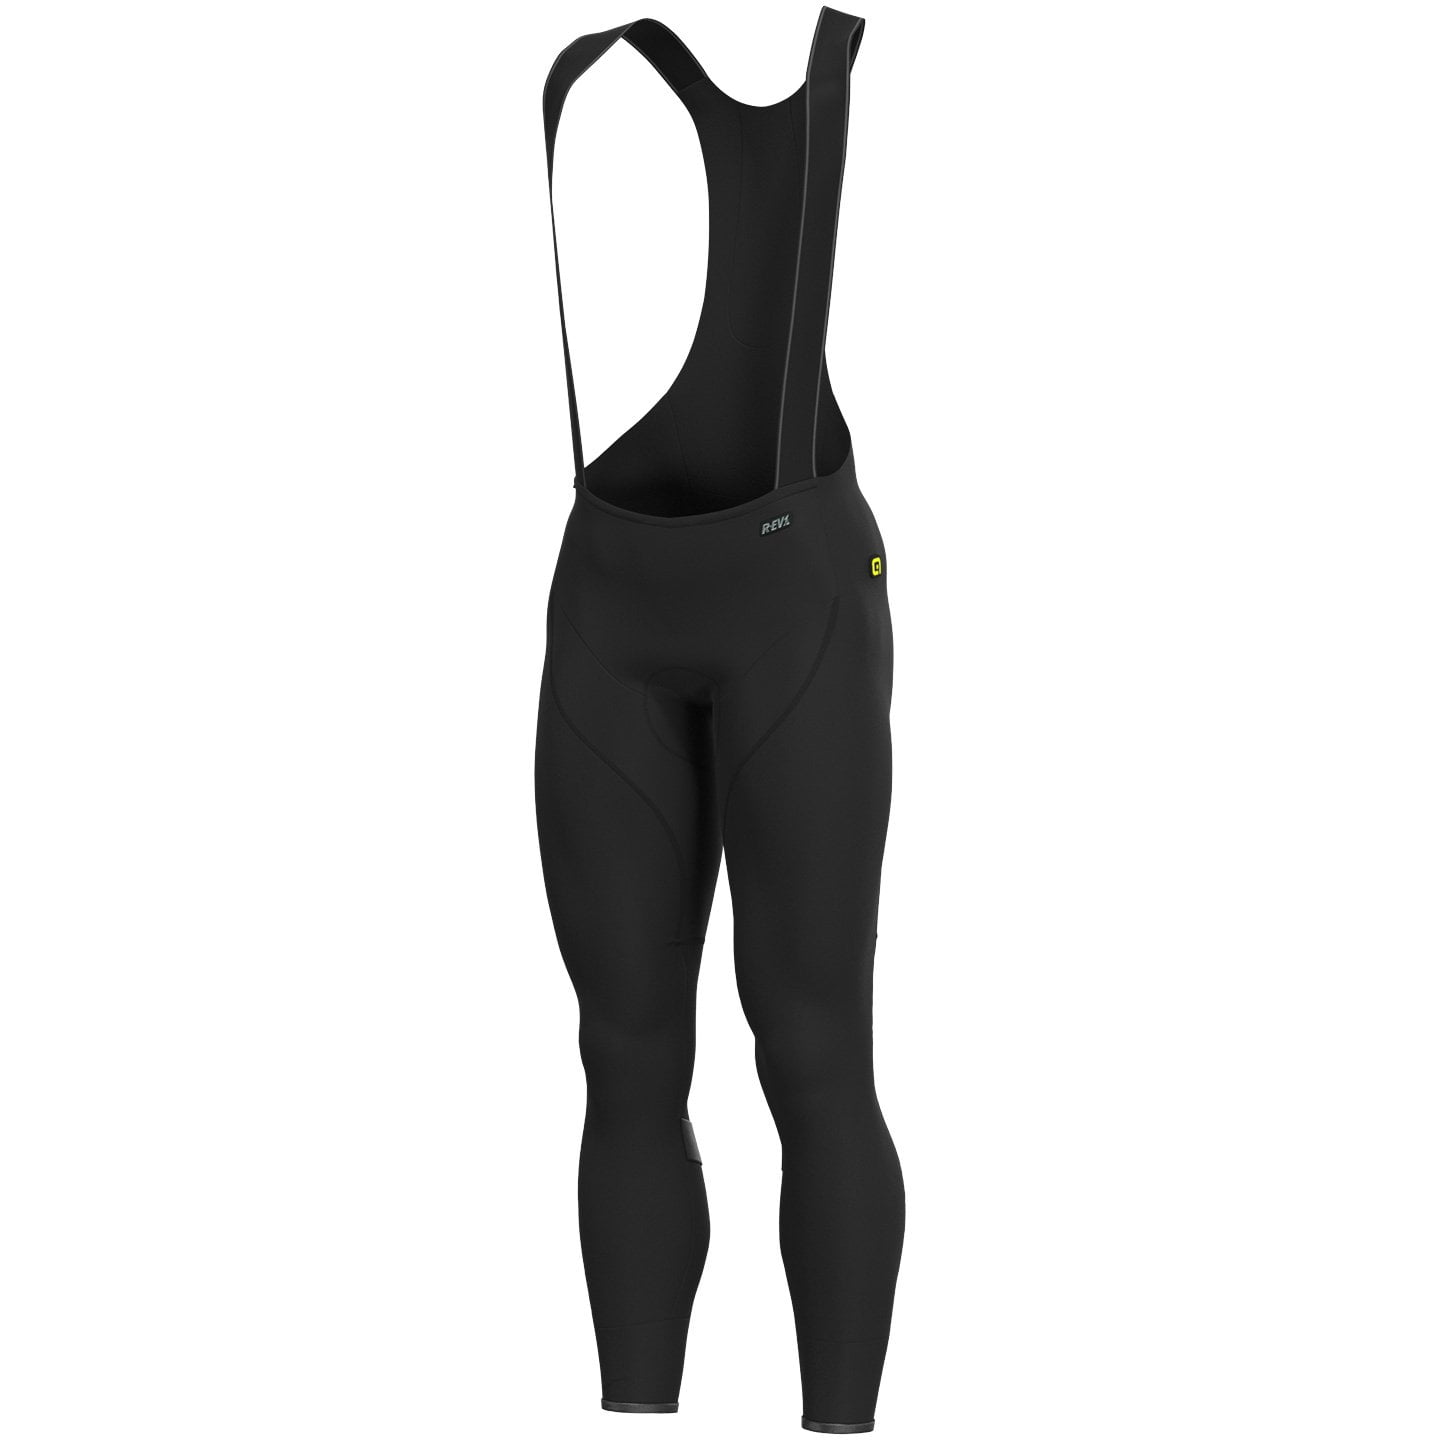 ALE Clima Warm Plus Bib Tights Bib Tights, for men, size S, Cycle trousers, Cycle clothing